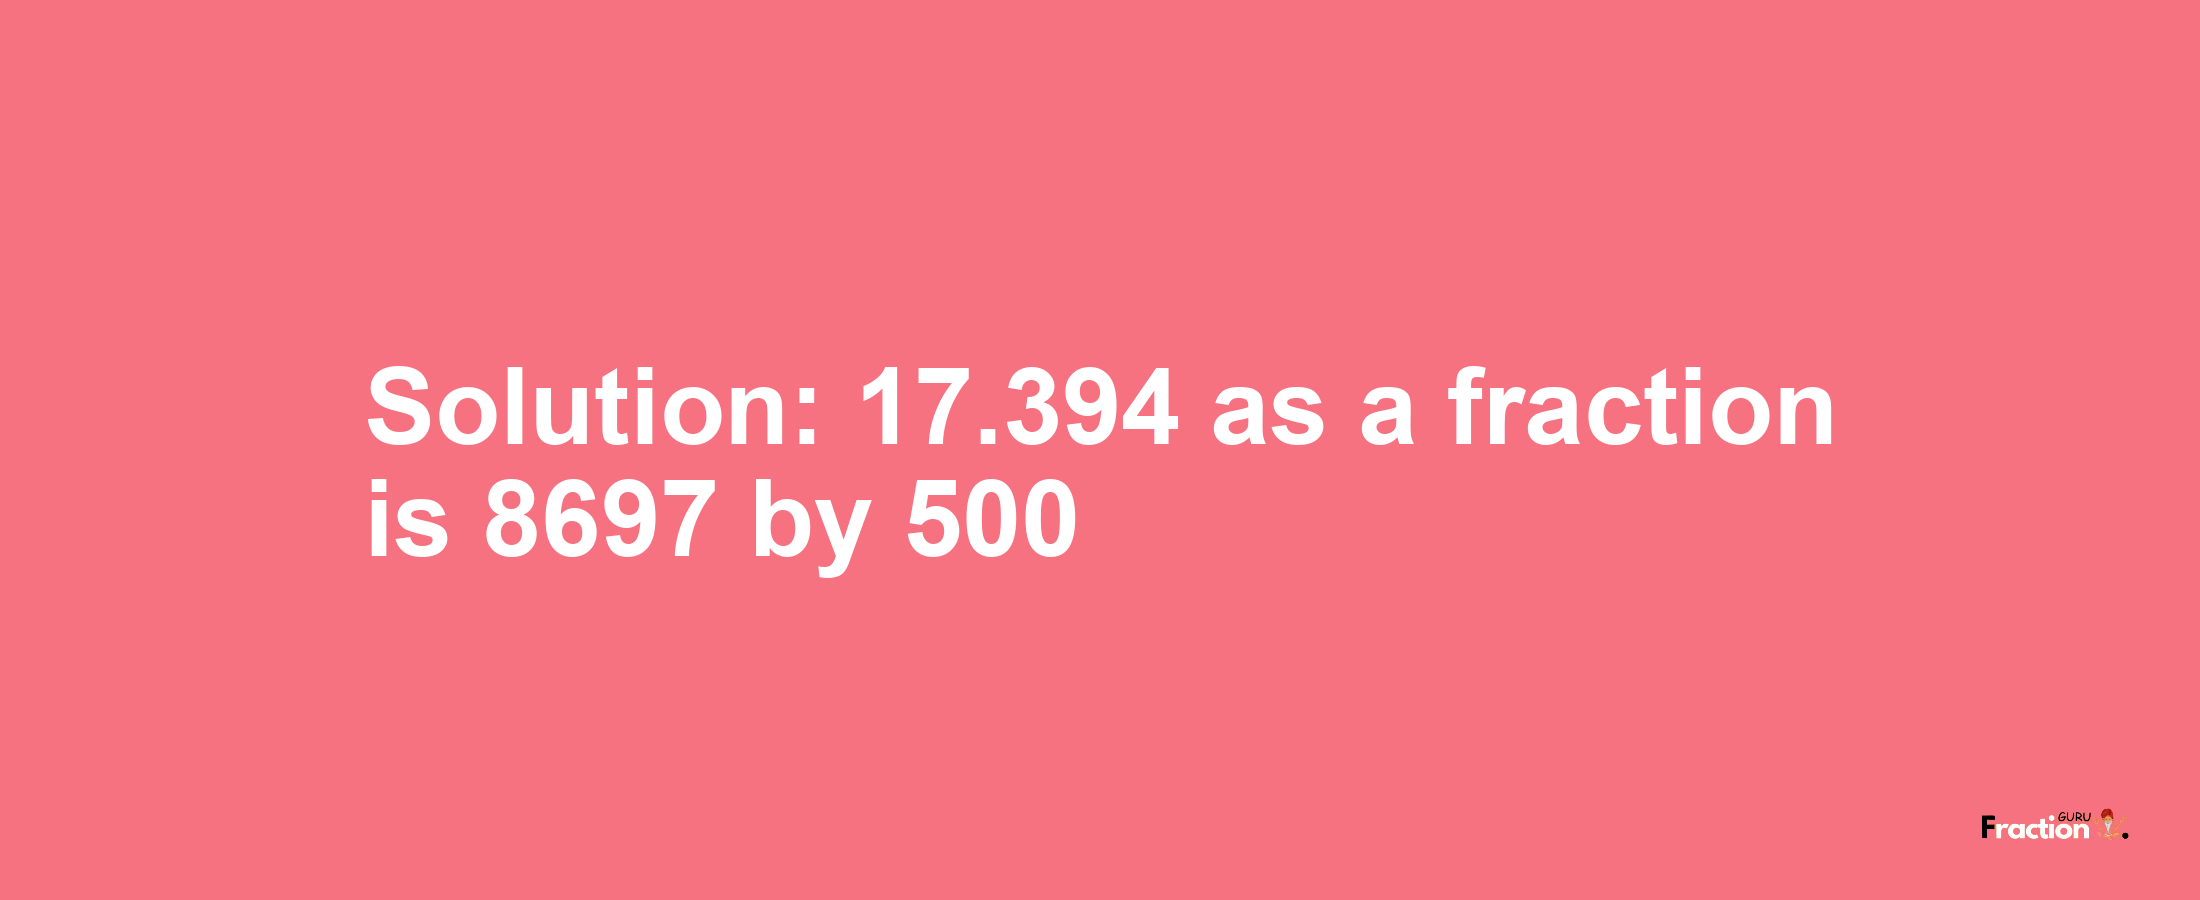 Solution:17.394 as a fraction is 8697/500